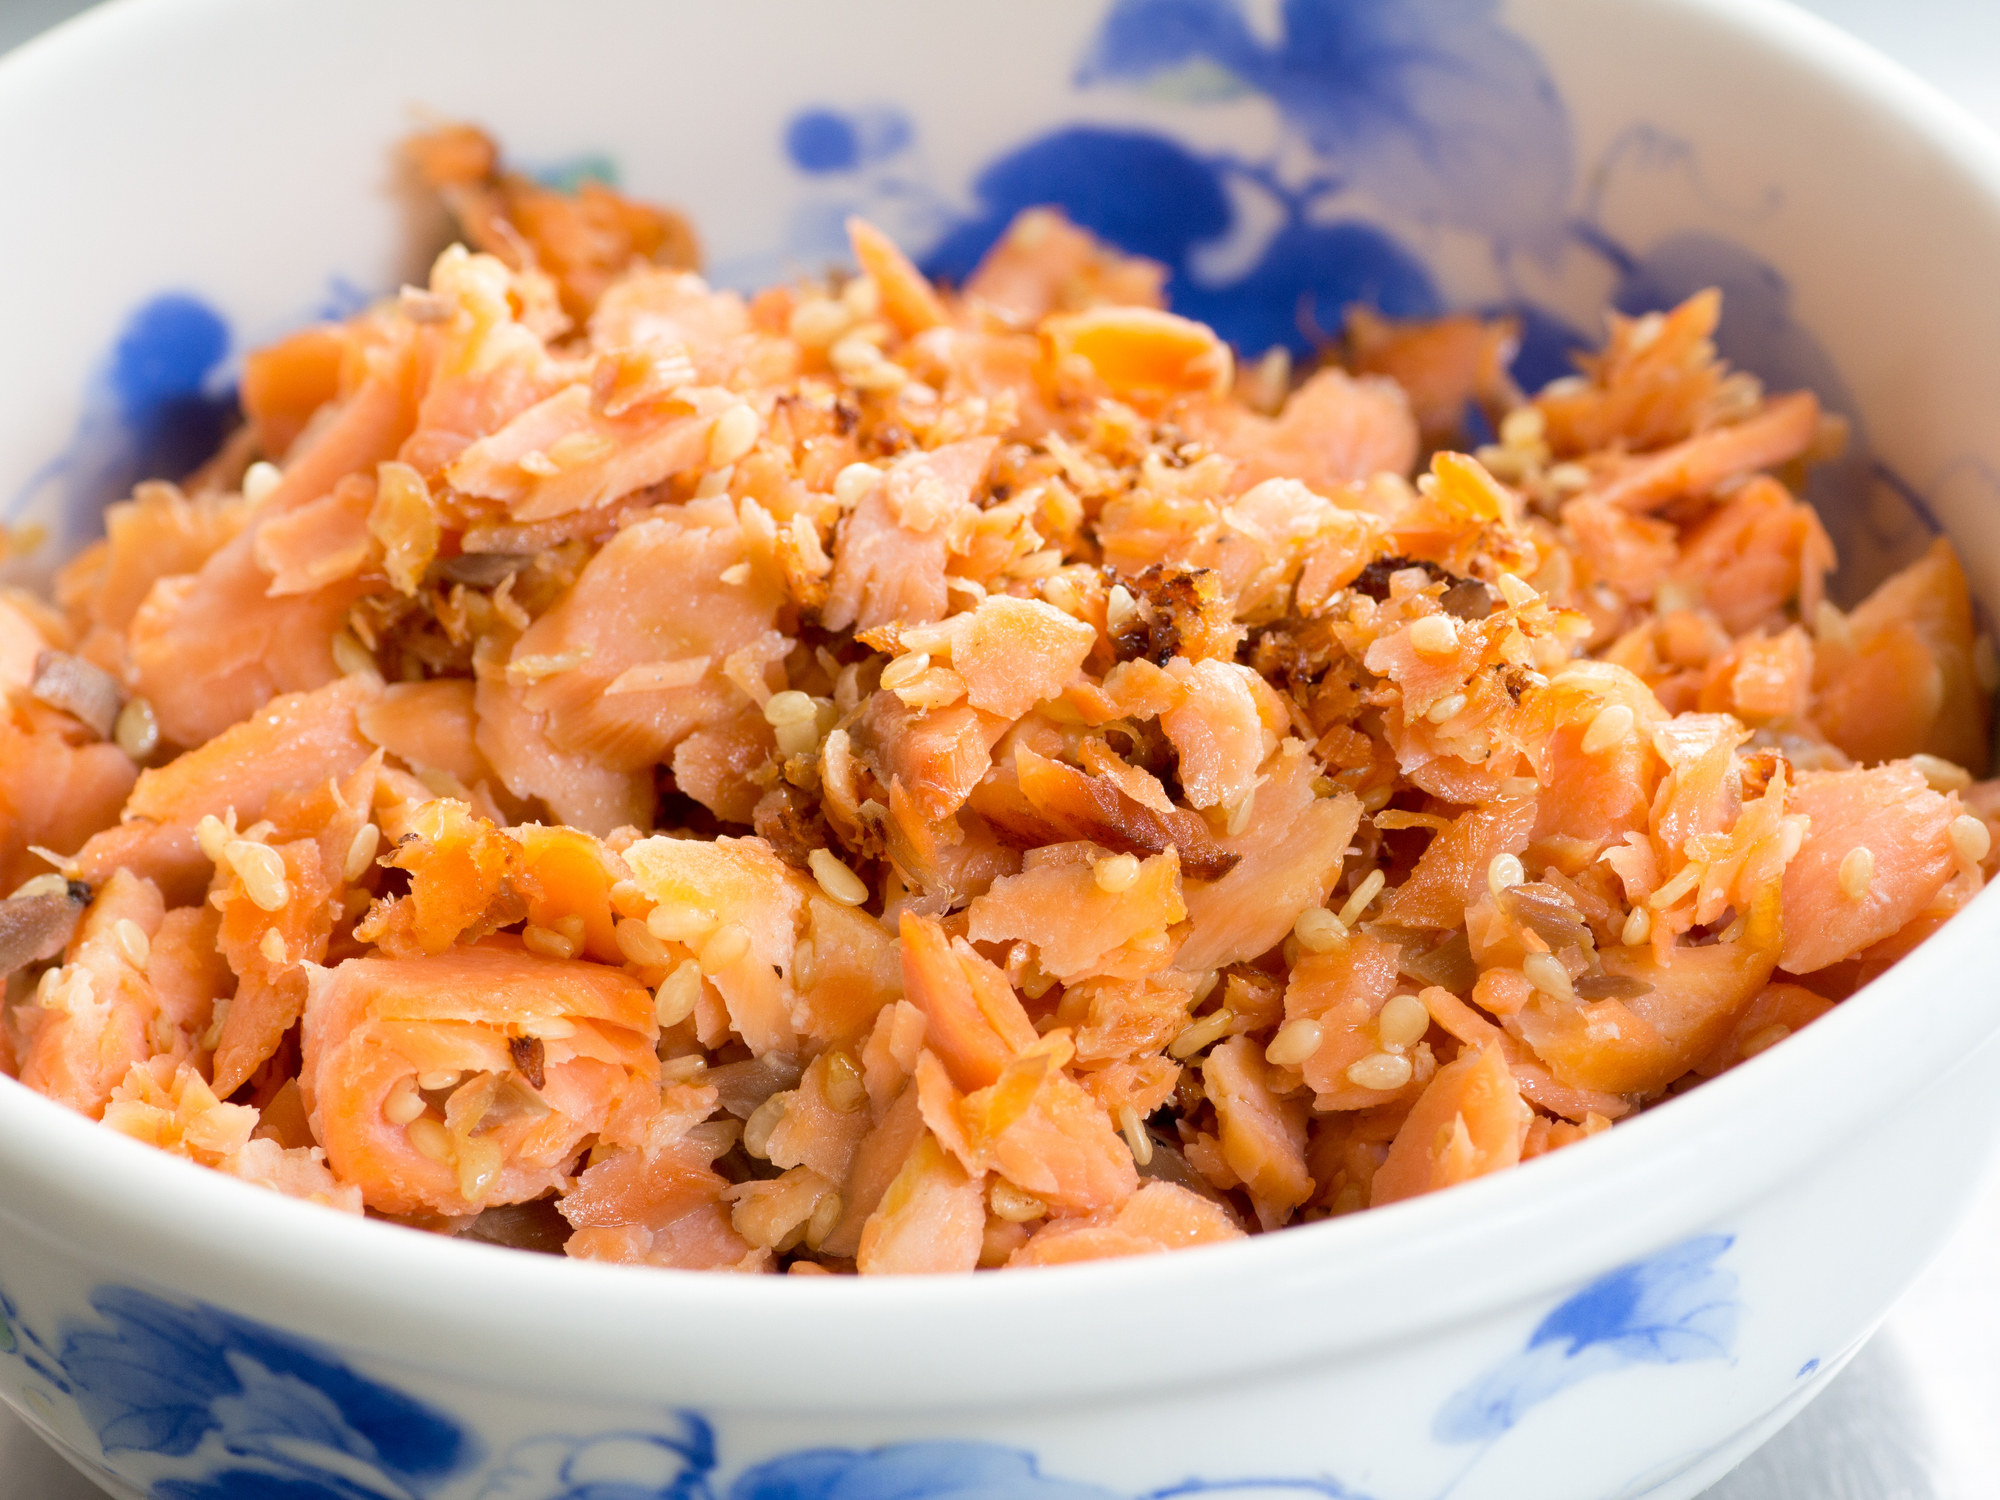 Flaked salmon in a bowl.